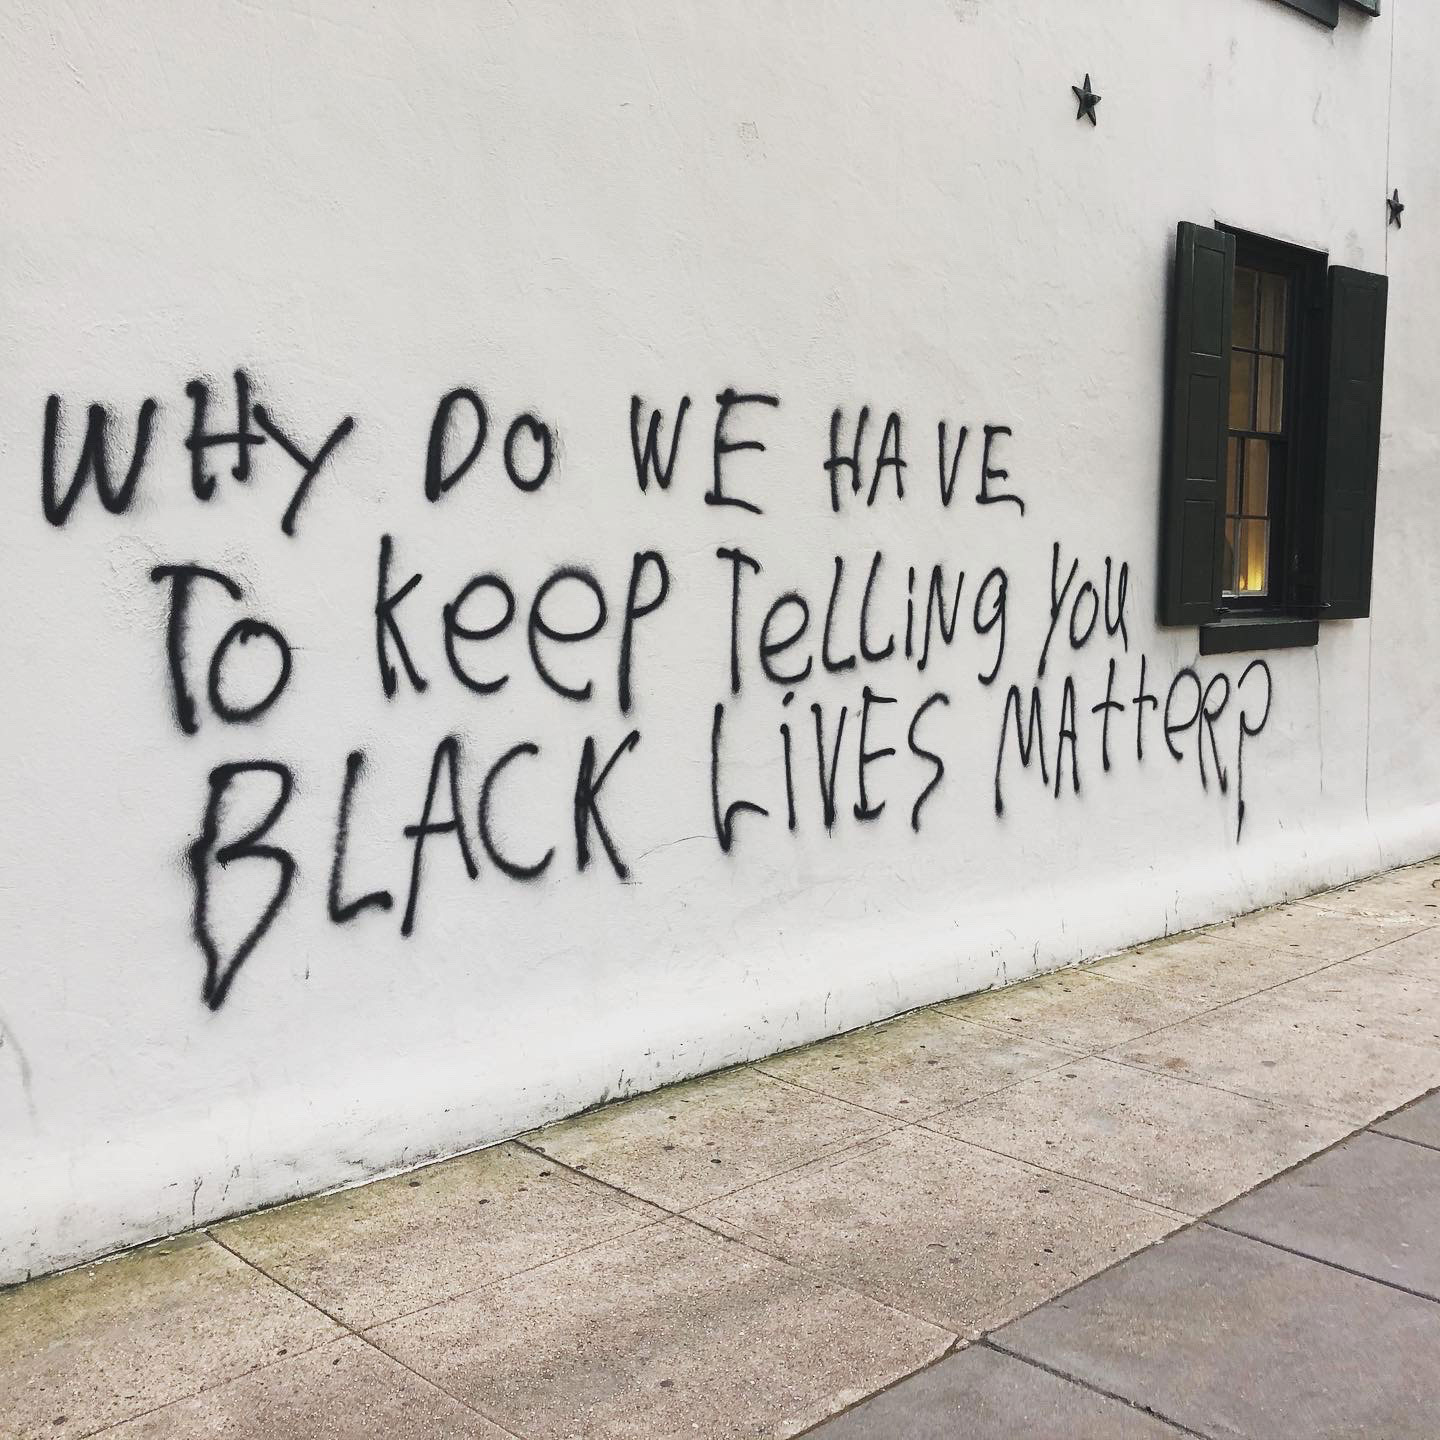 Throughout the protests, people have been tagging buildings with political messages and crucial questions about the rights of Black of people. This photo from May 30 documents just one of them: “Why do we have to keep telling you Black lives matter?”